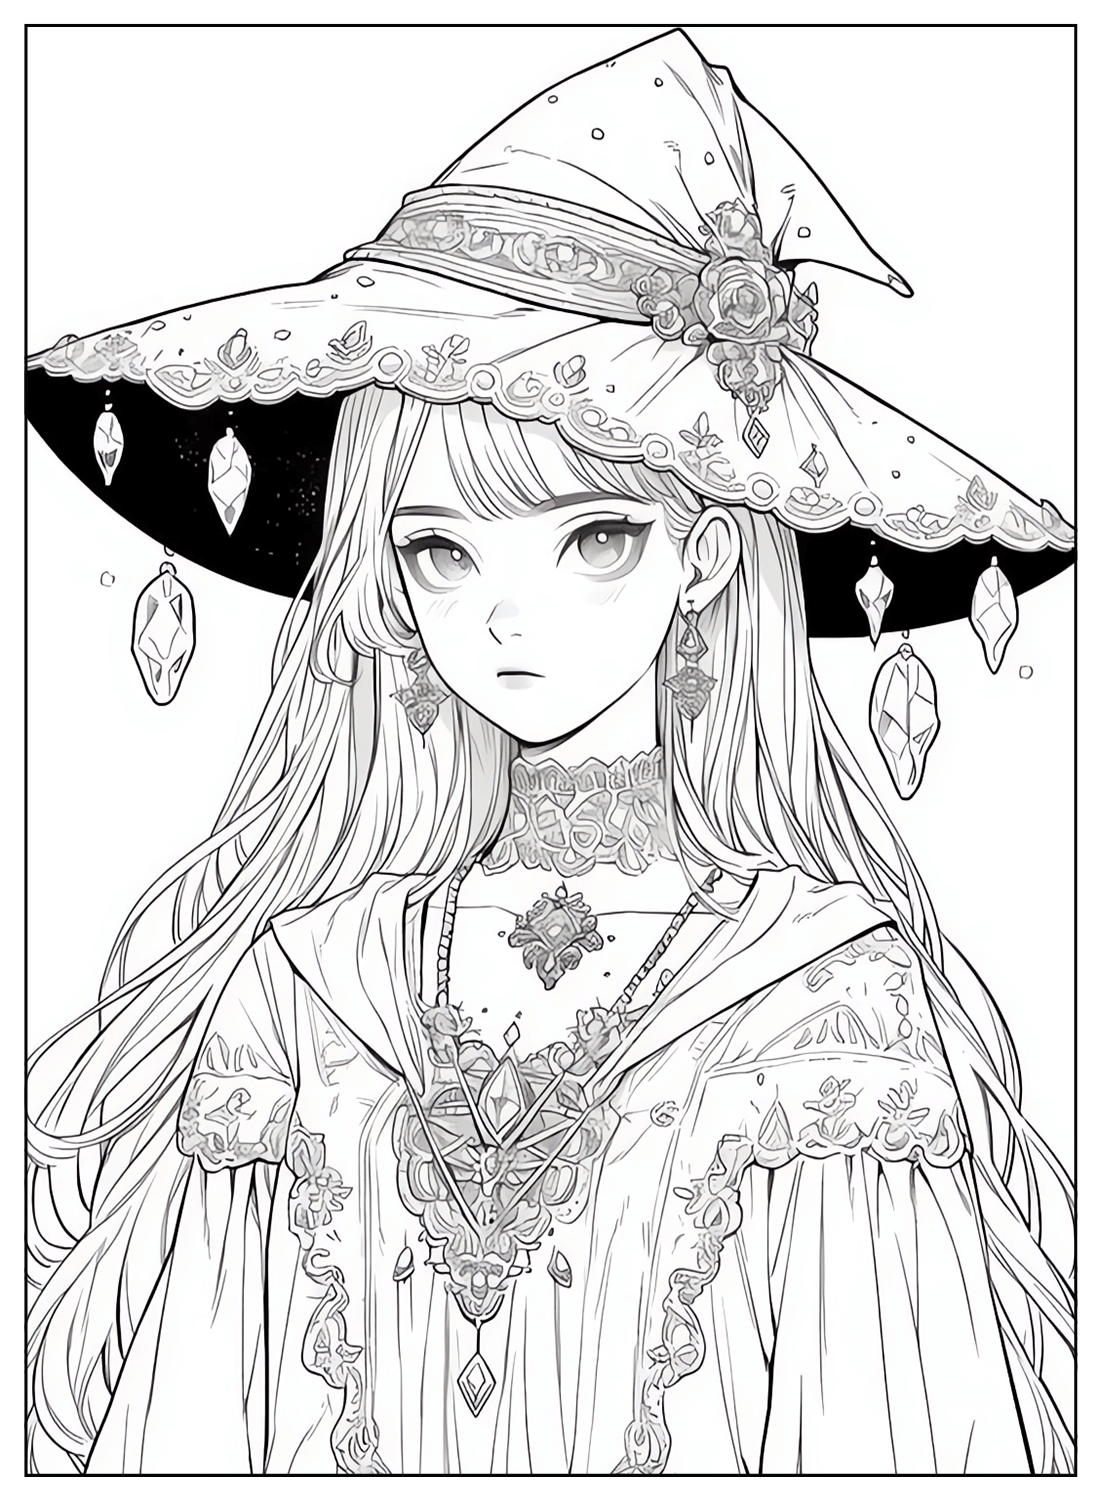 Printable Witch Hat Coloring Pages